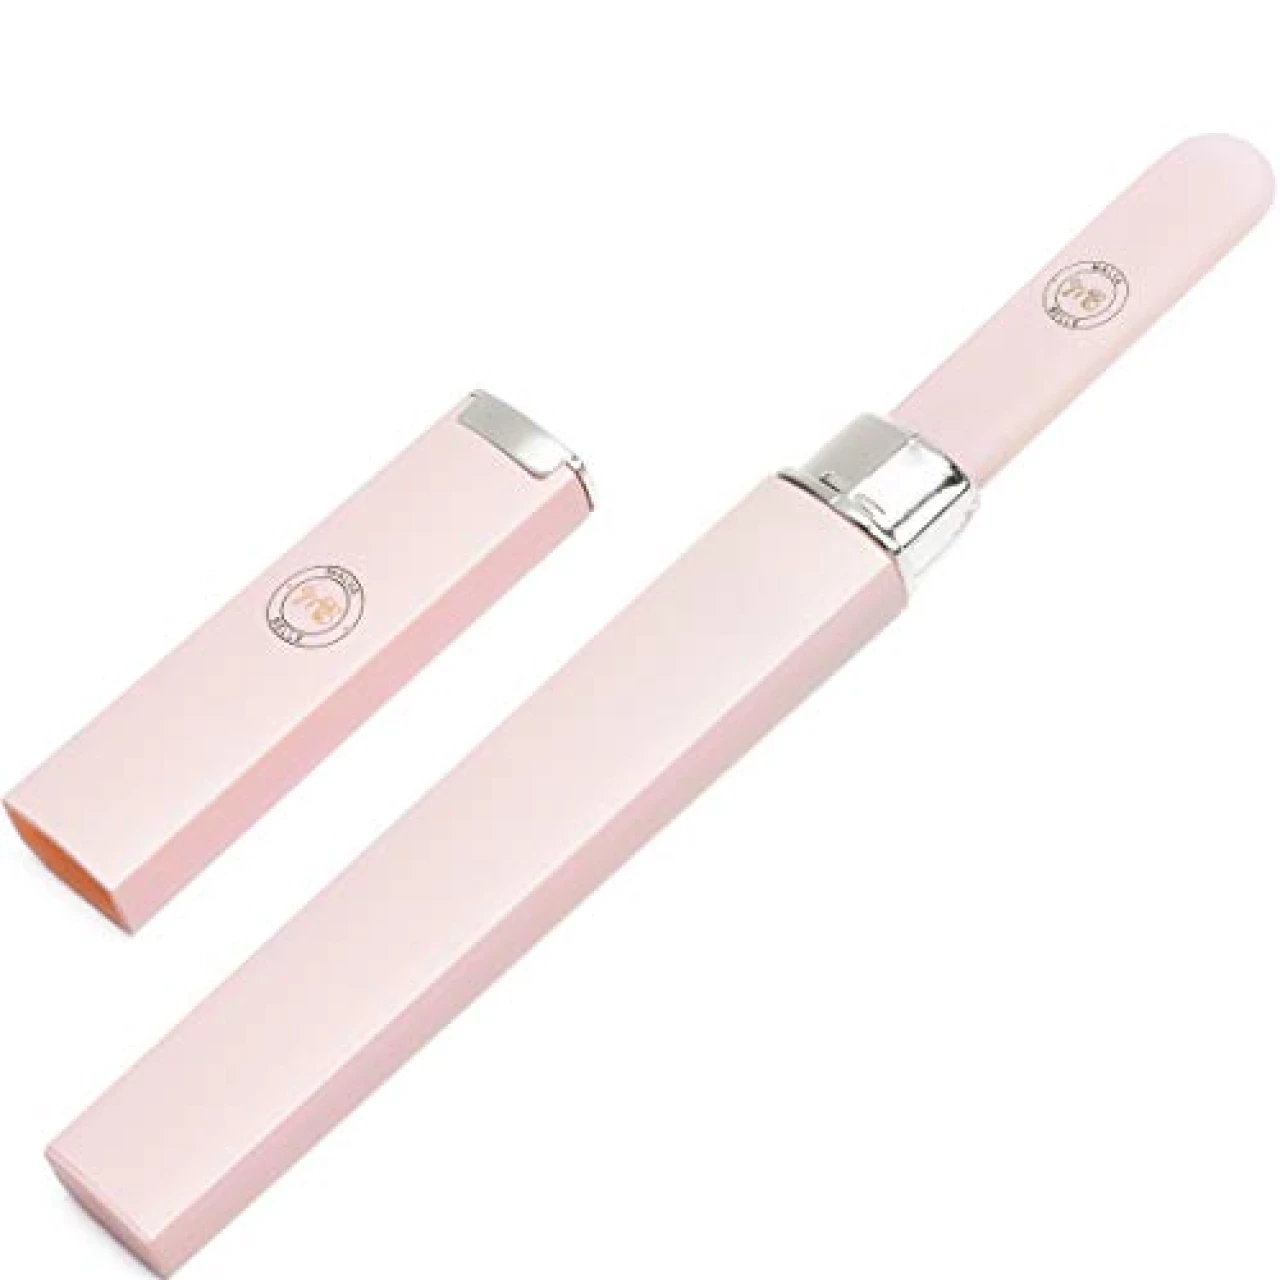 Best Crystal Glass Nail File for Women - Nail File &amp; Travel Case - Stocking Stuffers for Women - Heavy Duty Nail File for Natural Nails, Gel - Professional Nail Shaper - Nail Essentials - Pink 2mm